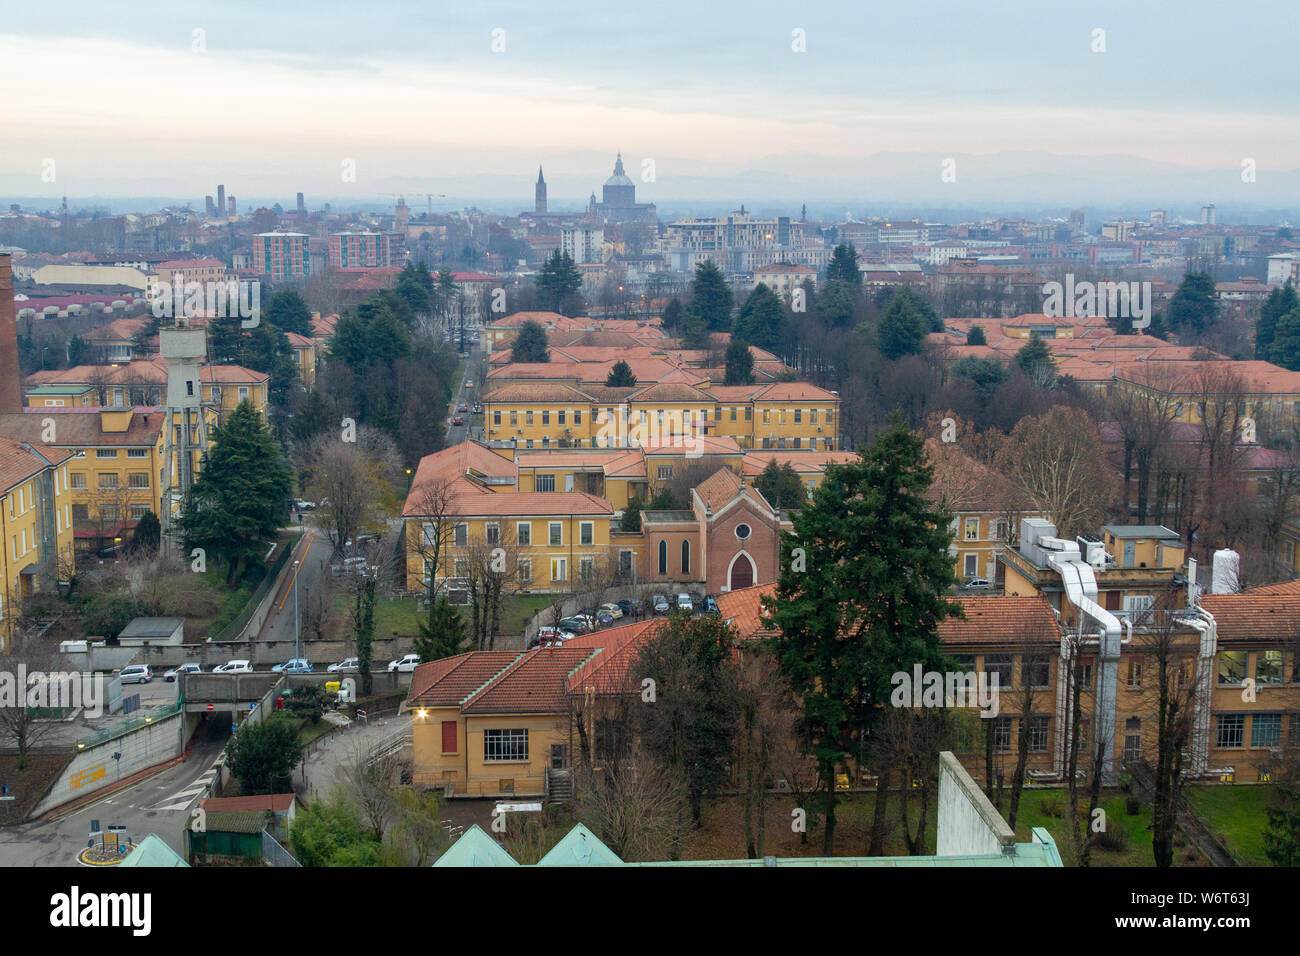 A view of the hospital of the Ospedale San Matteo (Saint Matthew Hospital) in Pavia with the city centre in the background. Stock Photo